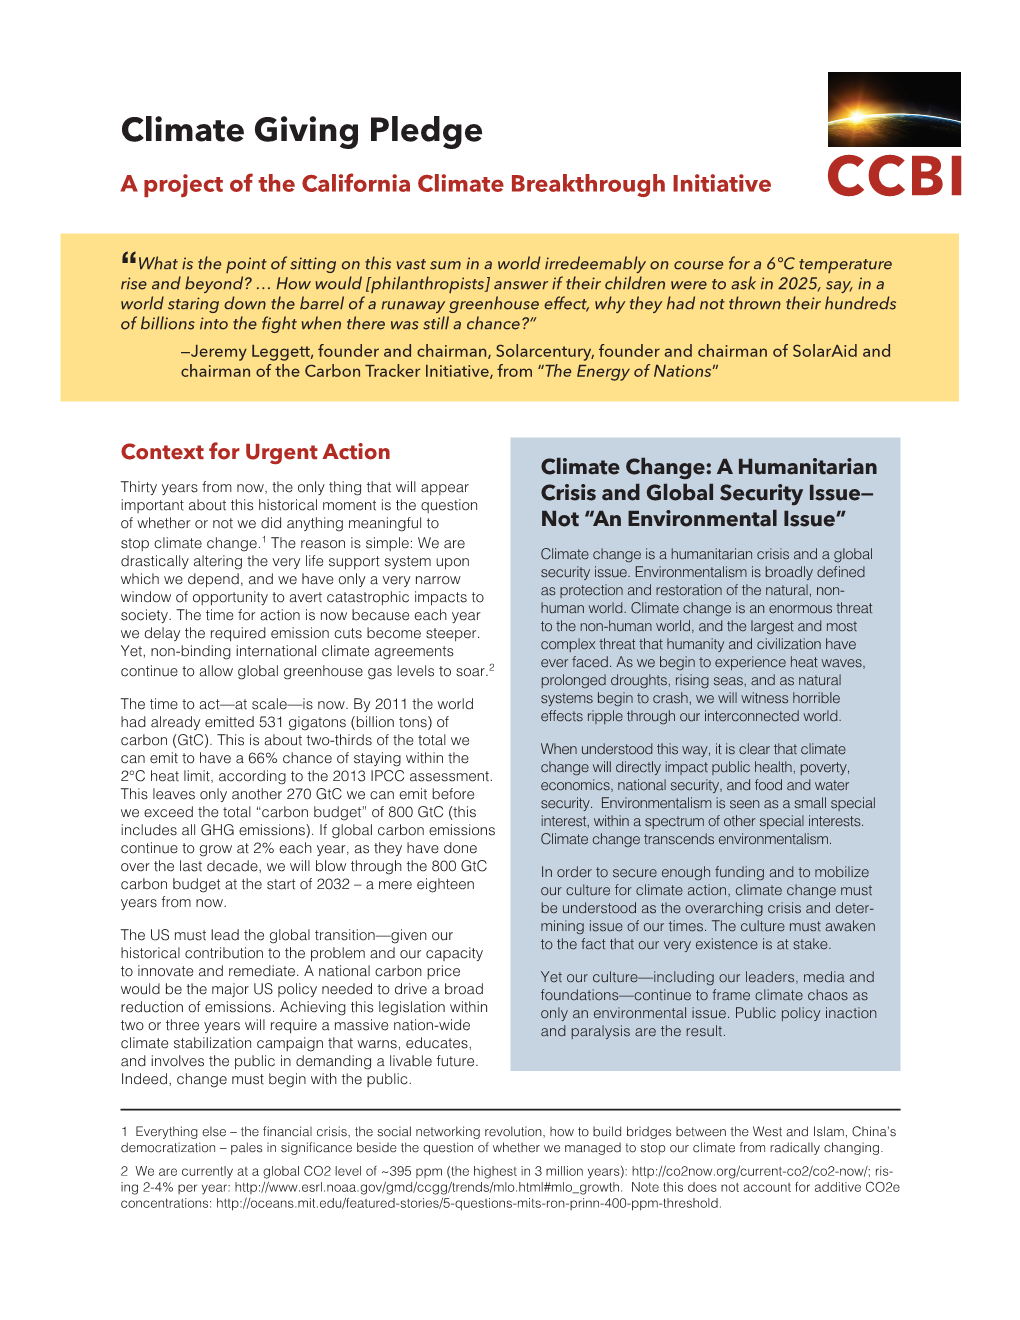 Climate Giving Pledge a Project of the California Climate Breakthrough Initiative CCBI